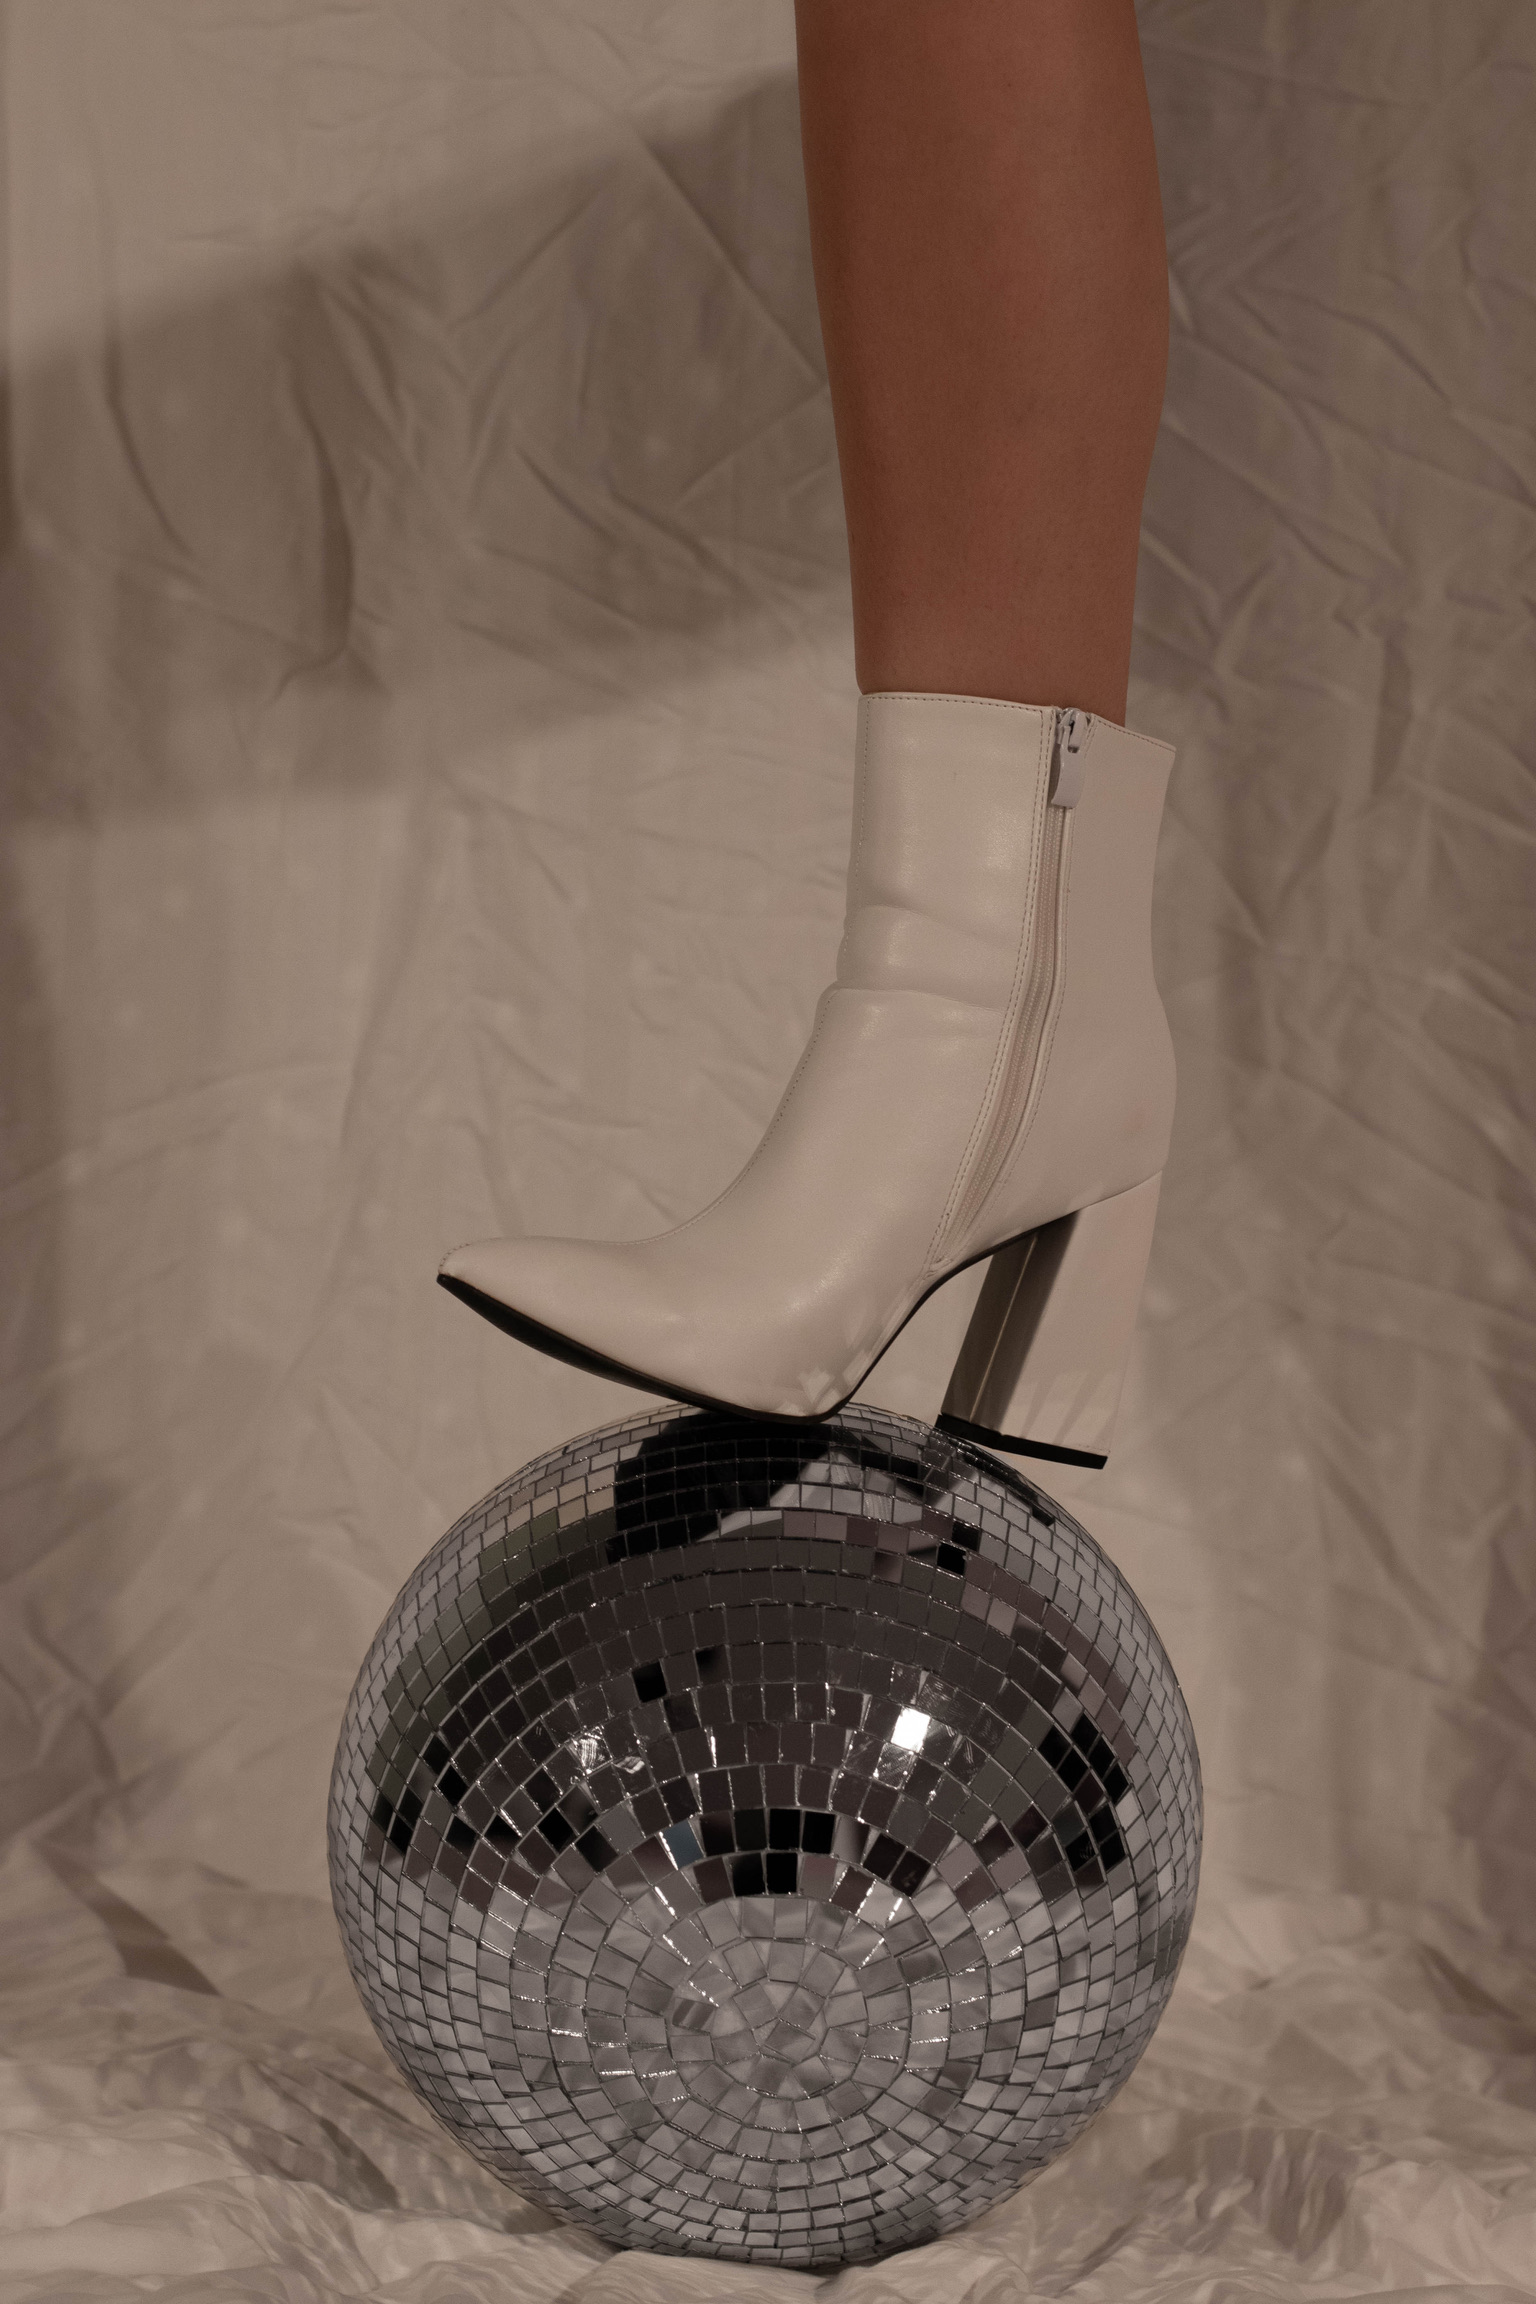 editorial photo of a disco ball and a girl wearing white boots stepping on the ball with one foot